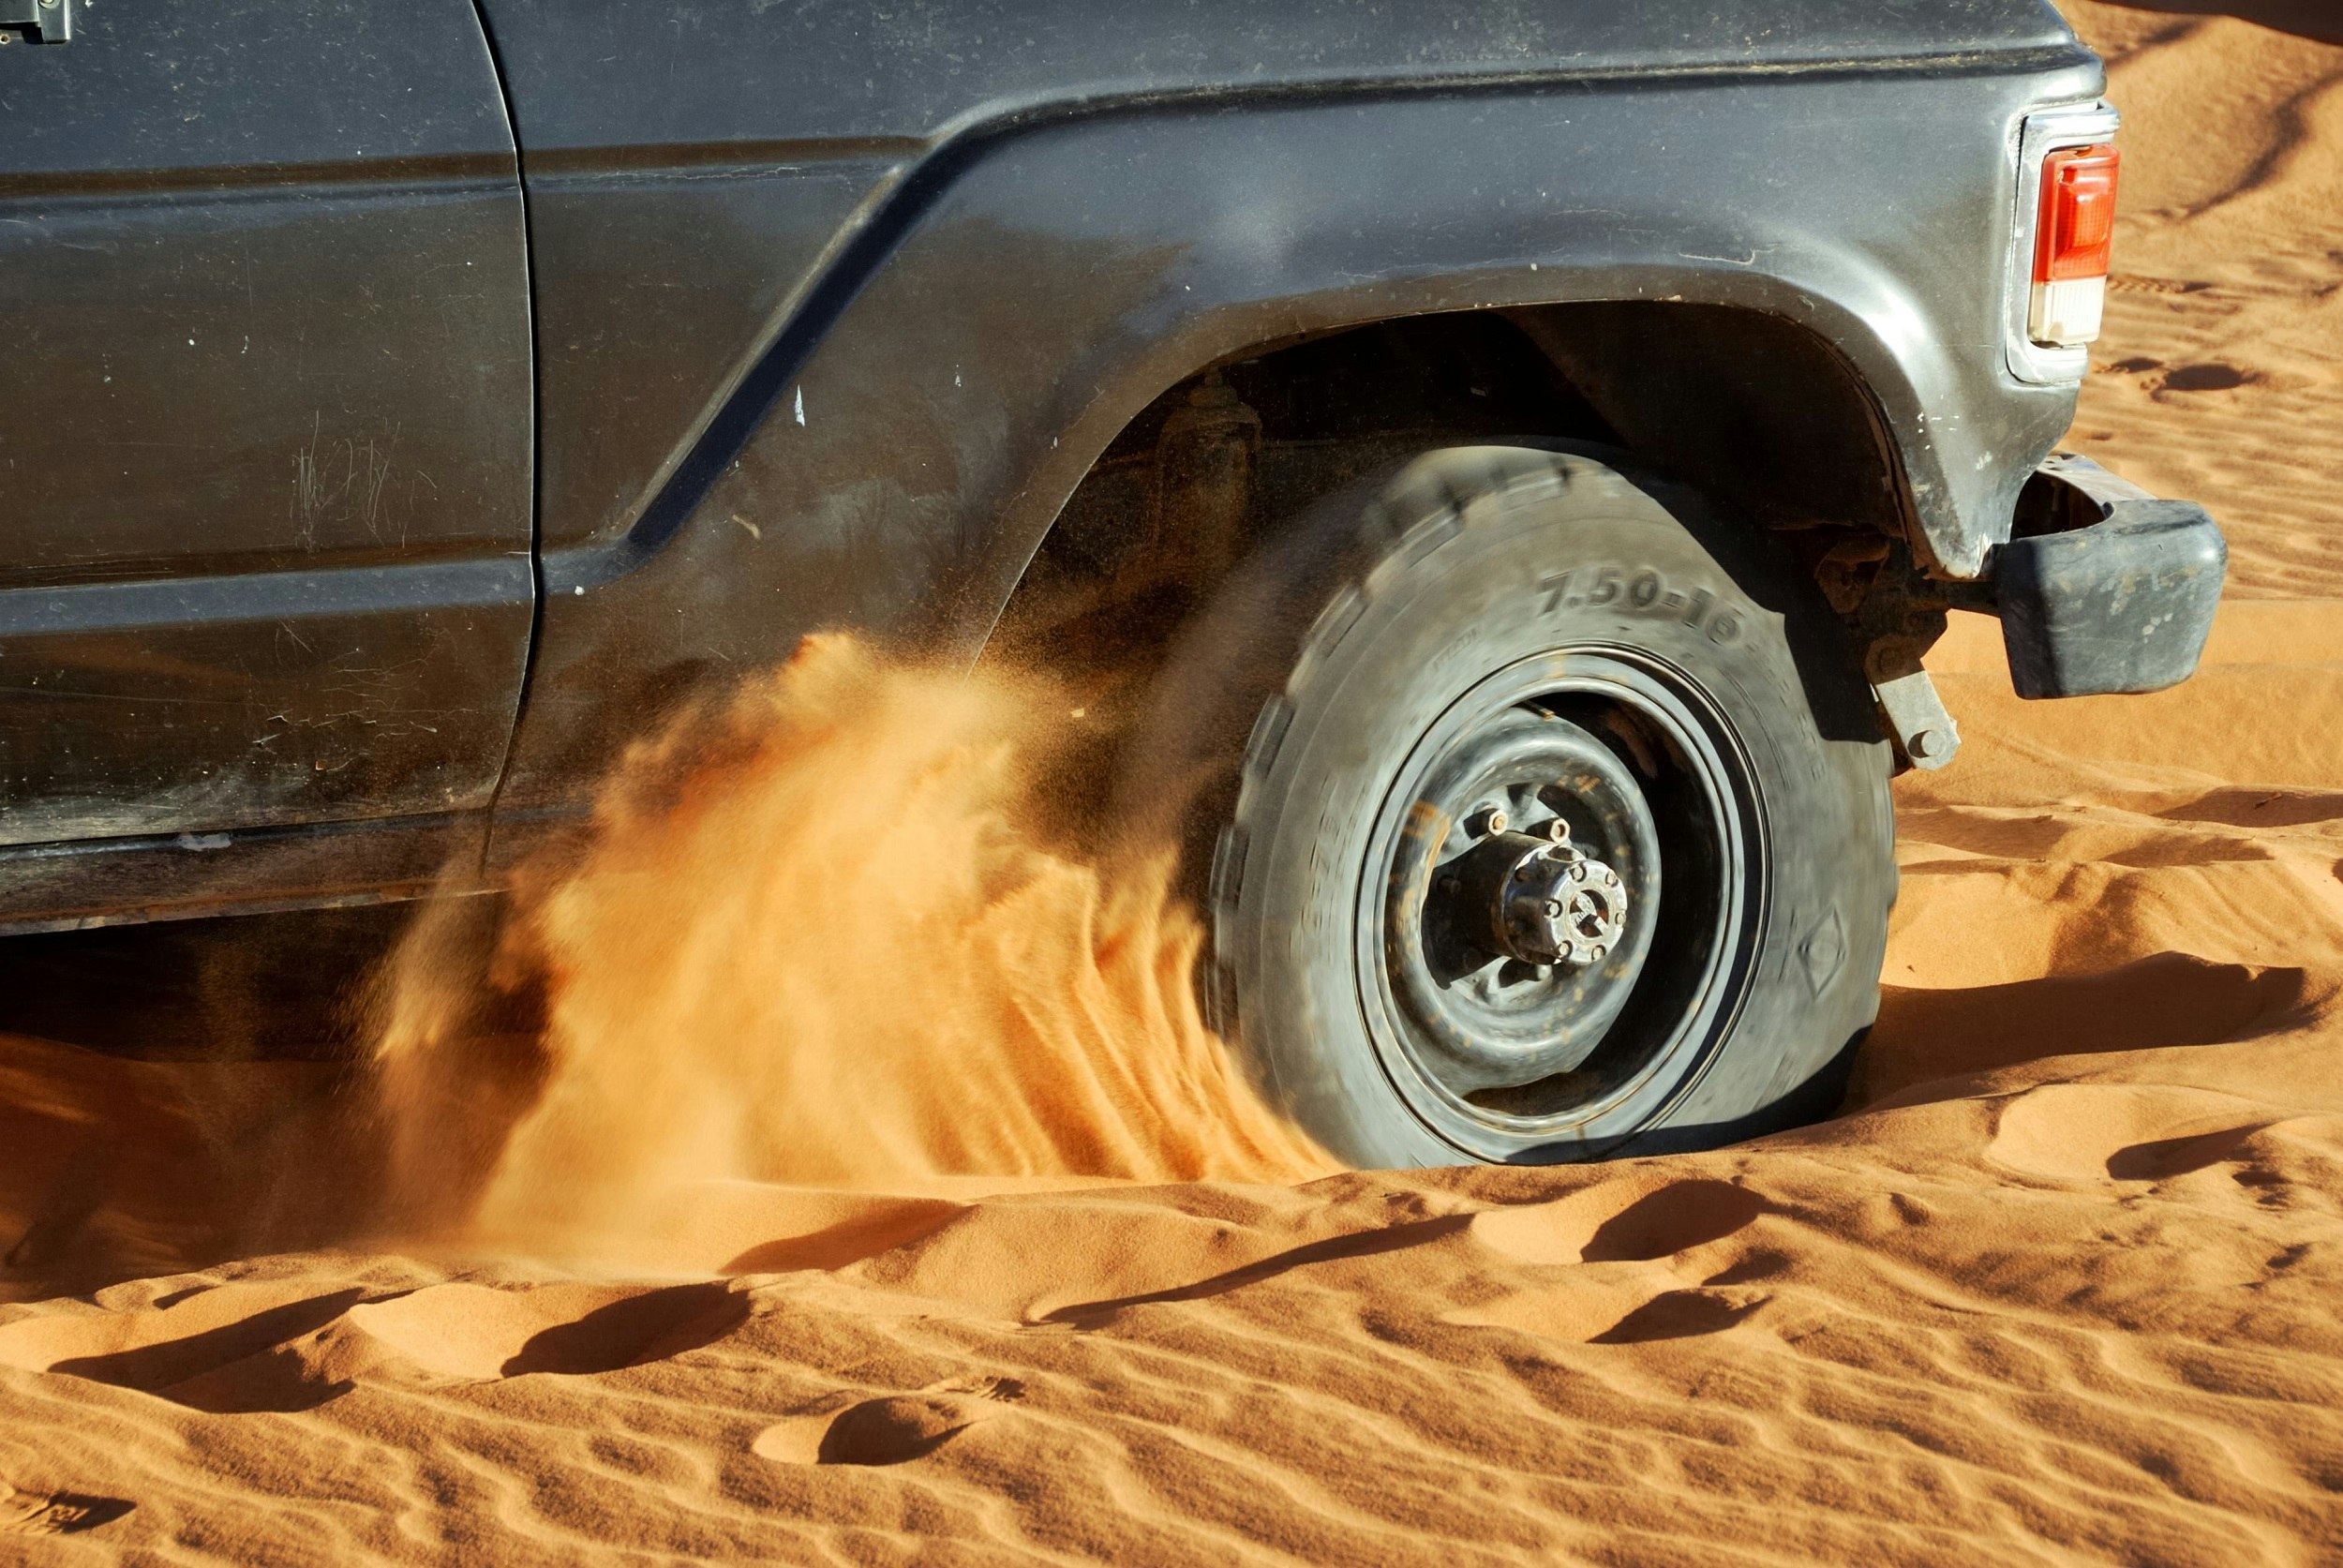 The front wheel of a Toyota Land Cruiser spins in deep sand, throwing it everywhere.